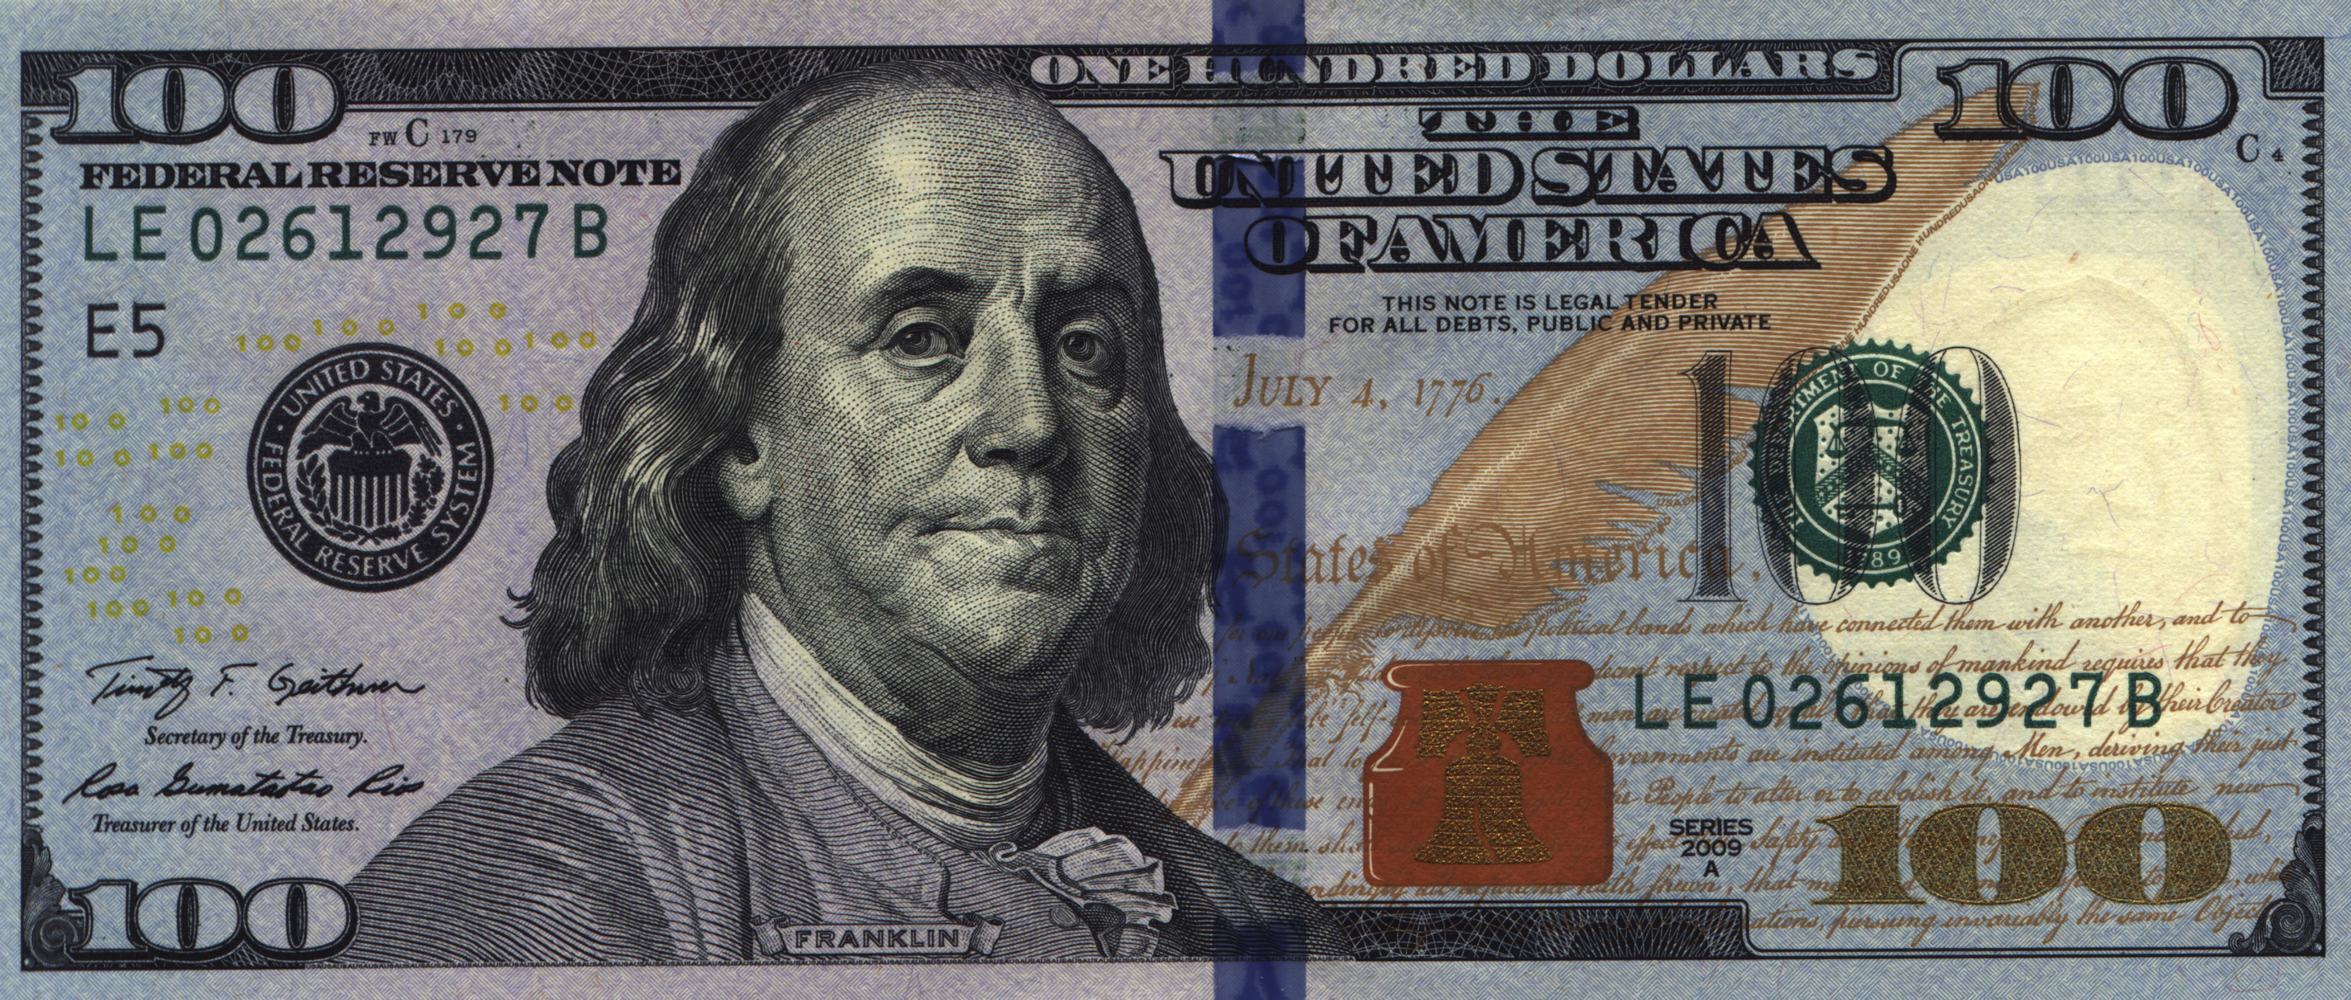 Federal Reserve Notes